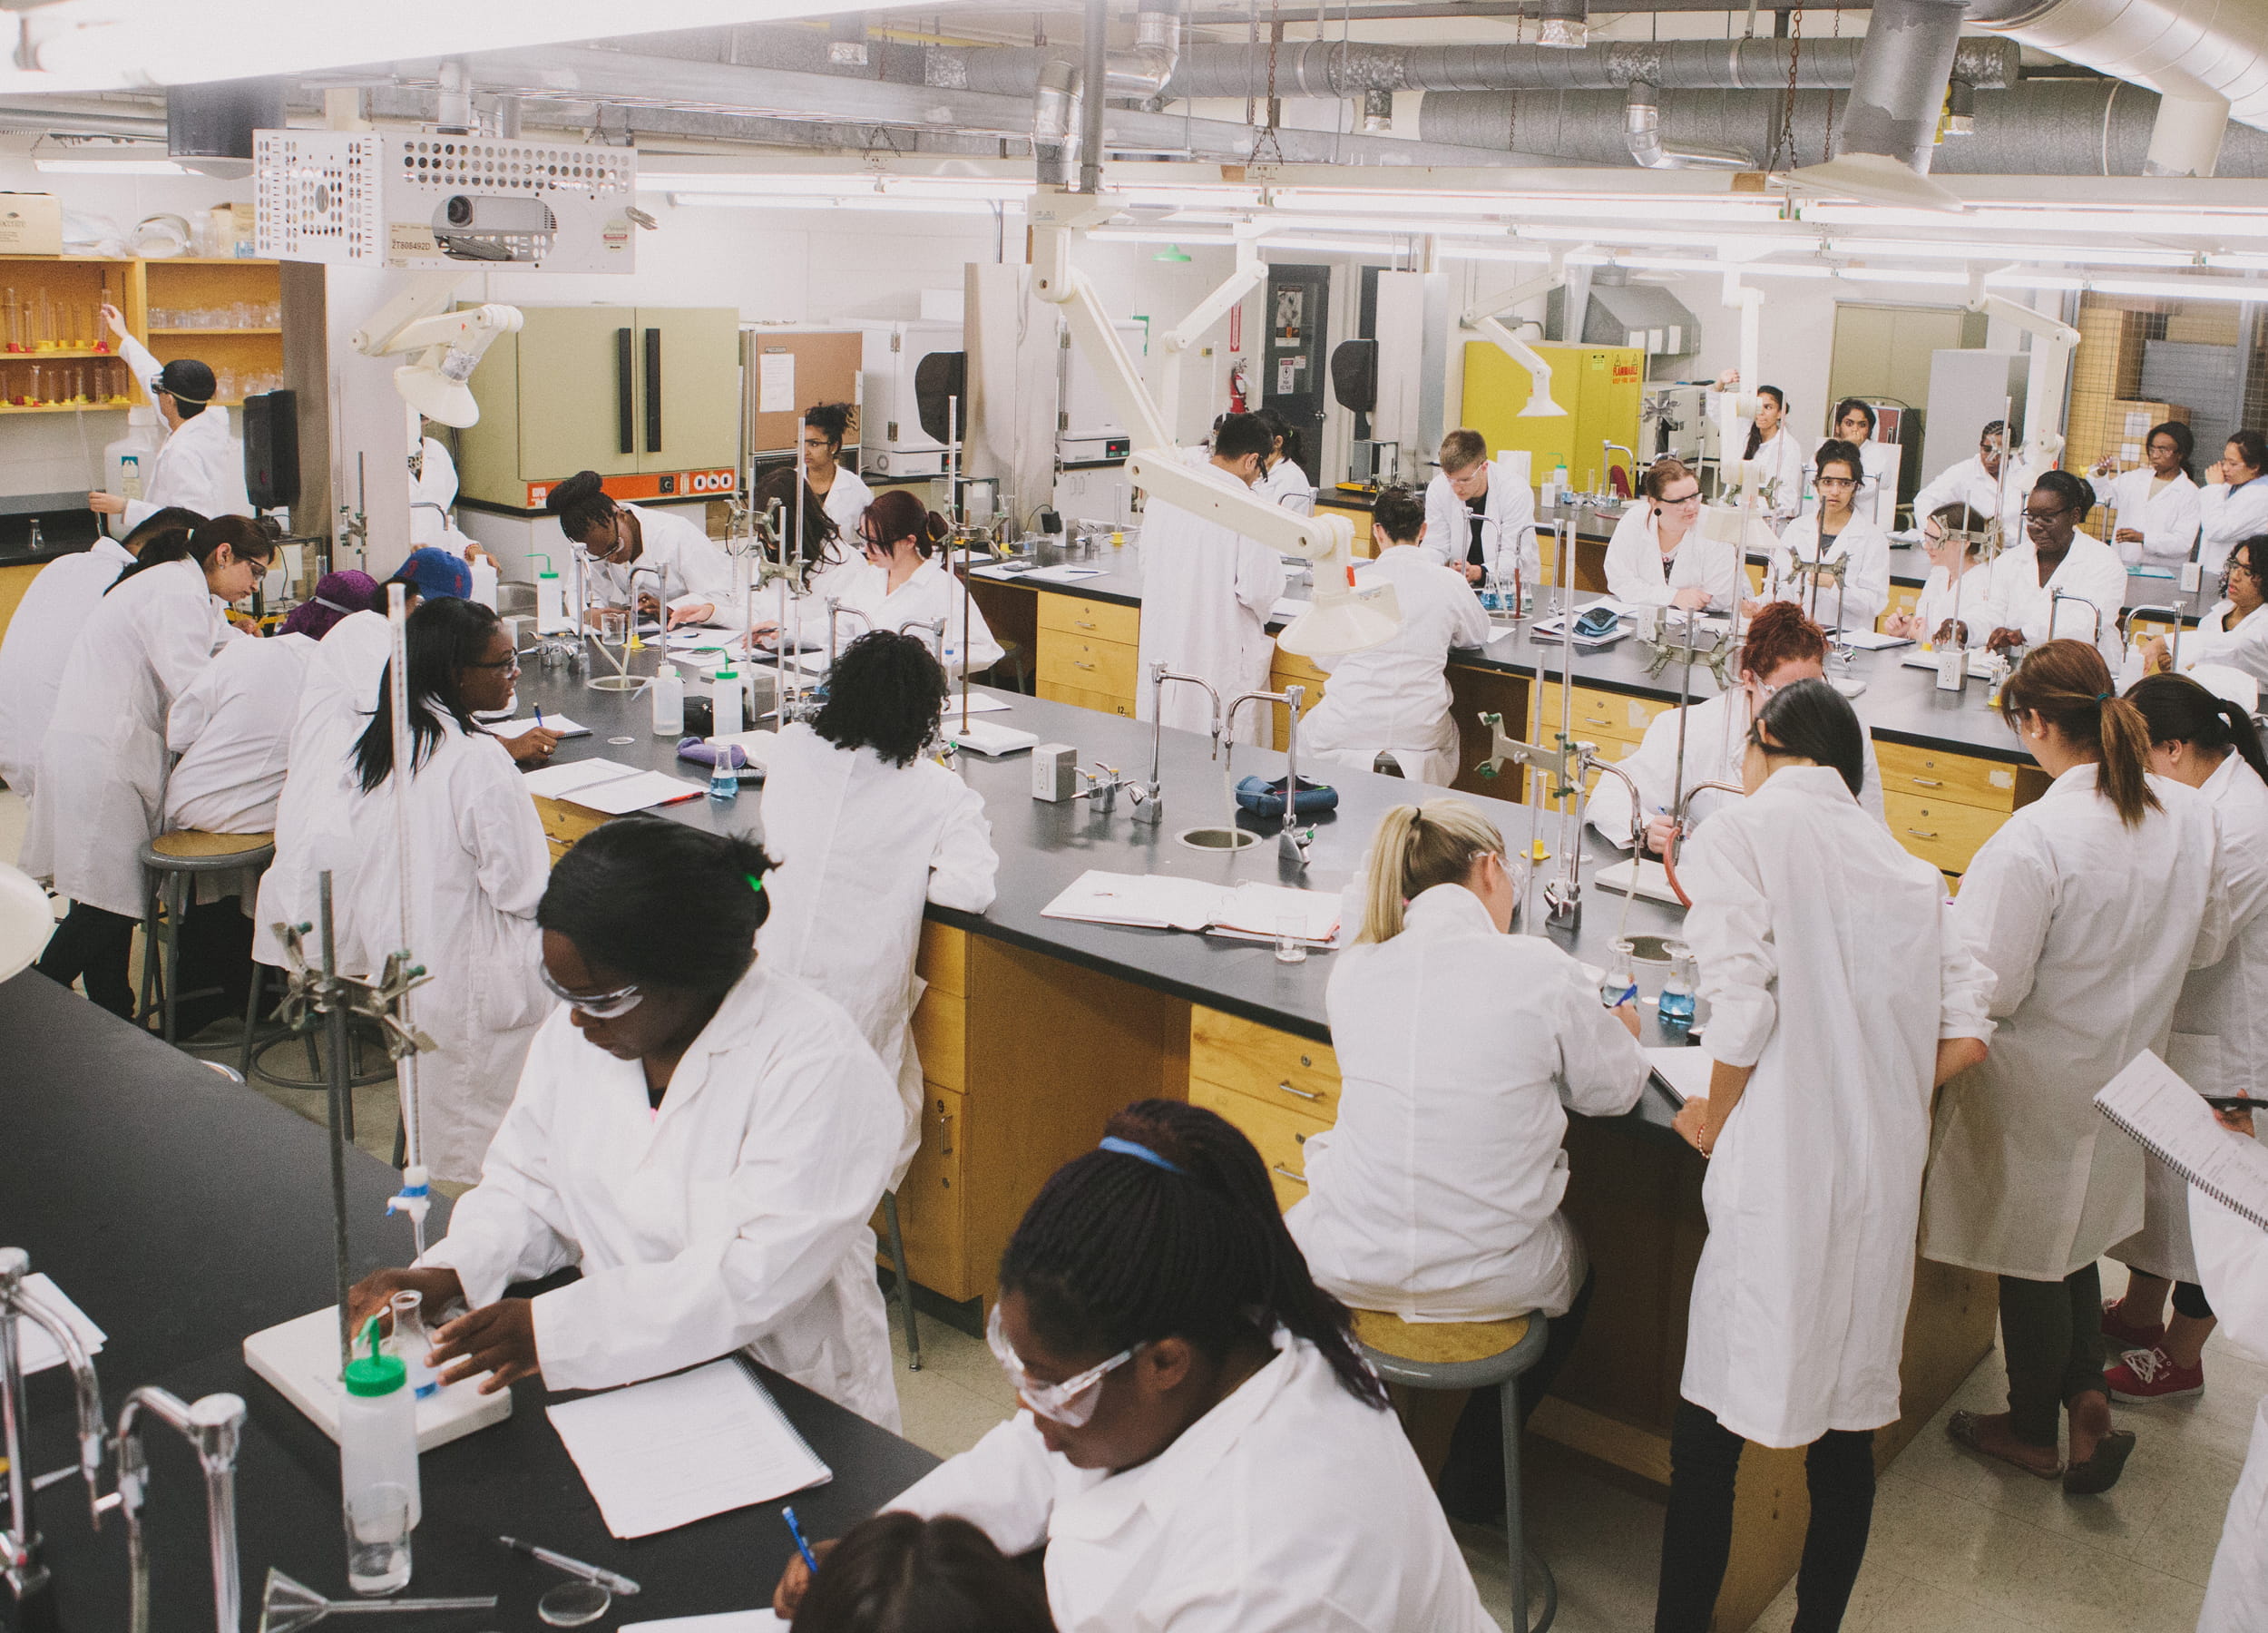 Chemical Laboratory Technician students in a classroom